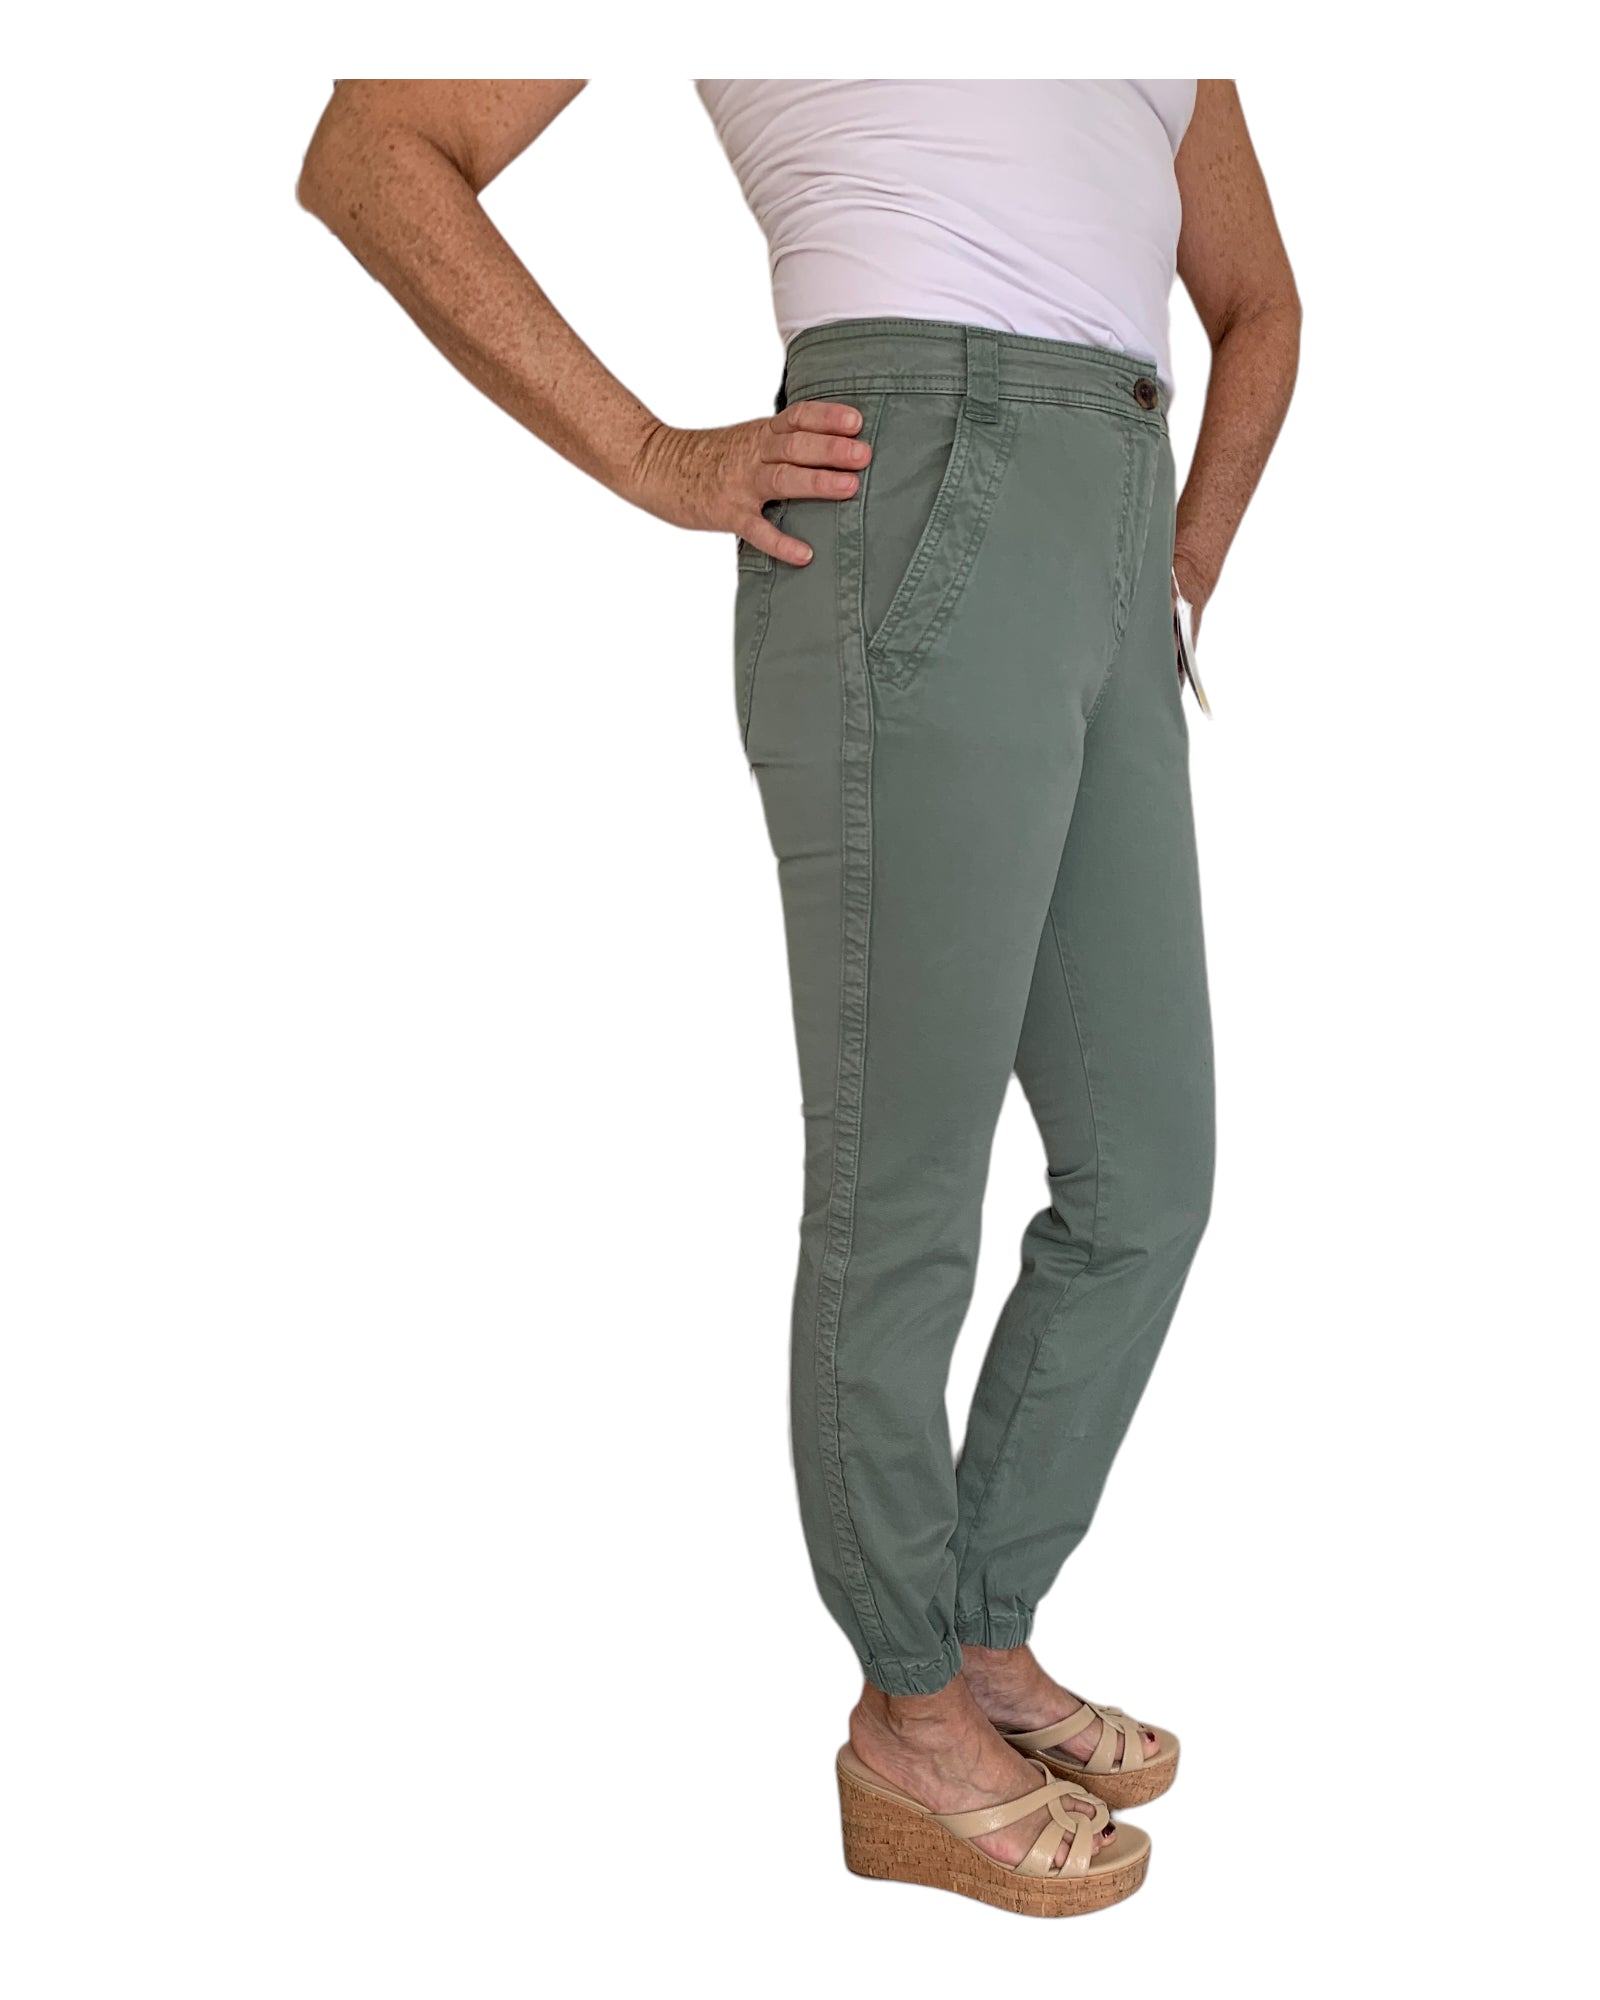 Boden Green Gowrie Cotton Joggers, 4